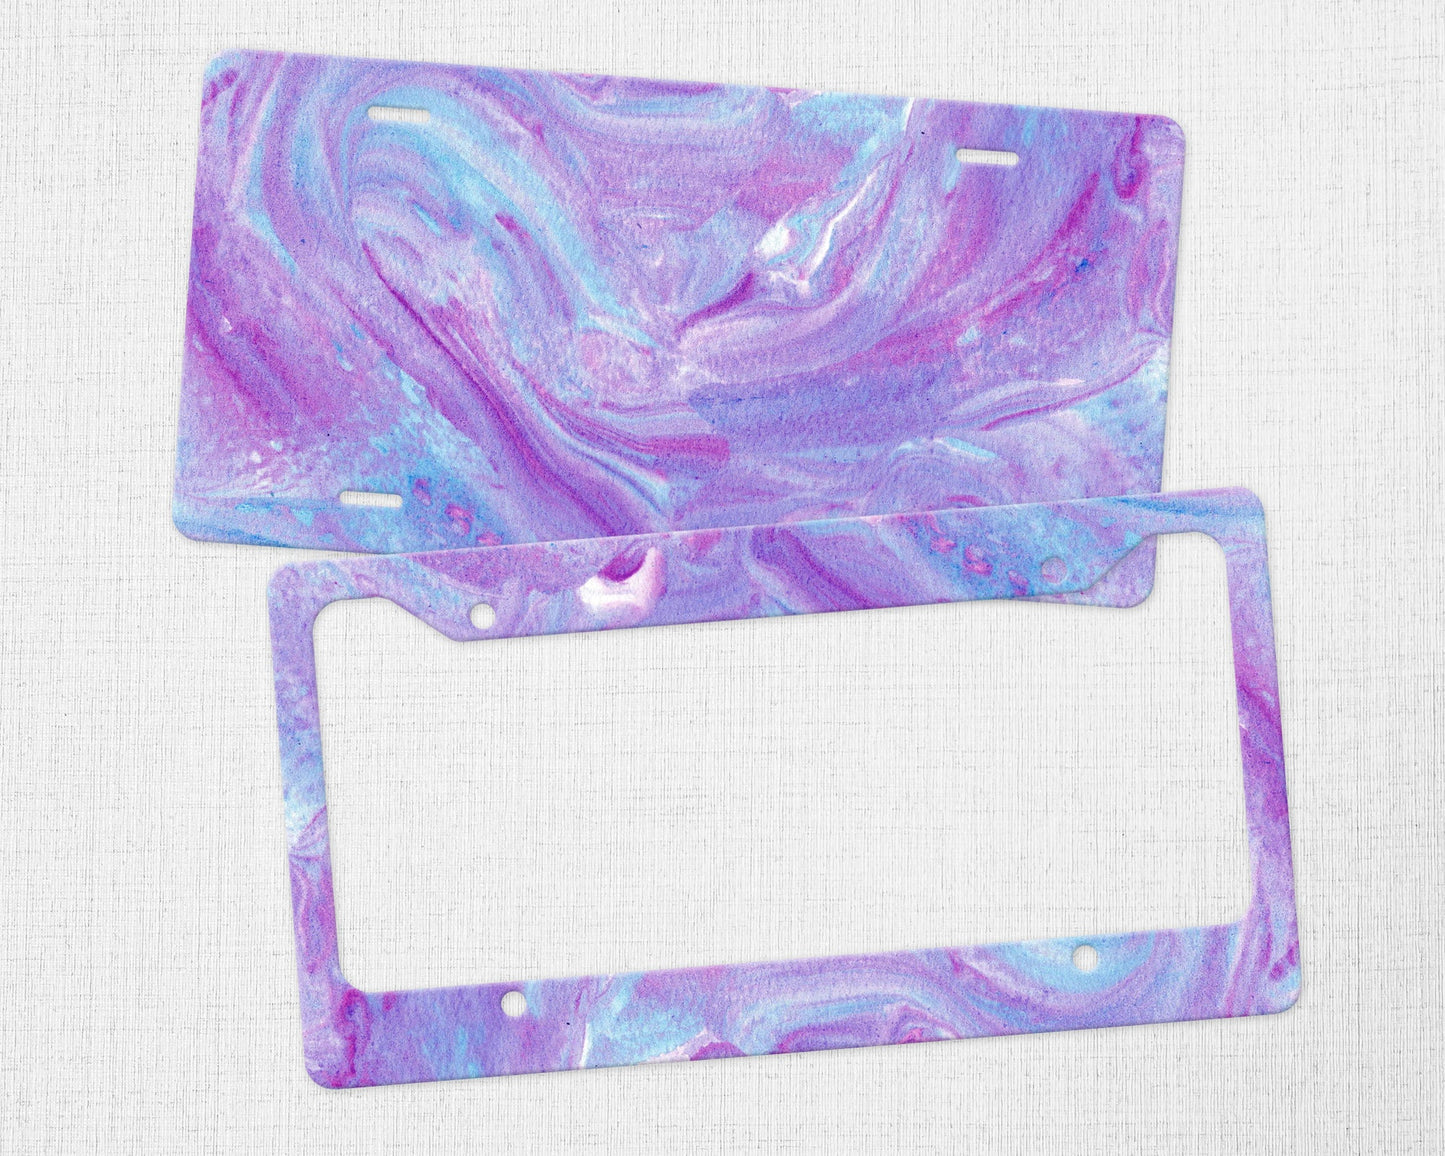 Purple and Blue Abstract License Plate - Rheumatoid Arthritis, Childhood Stroke, Smith-Magenis Syndrome, Mixed Connective Tissue Disease